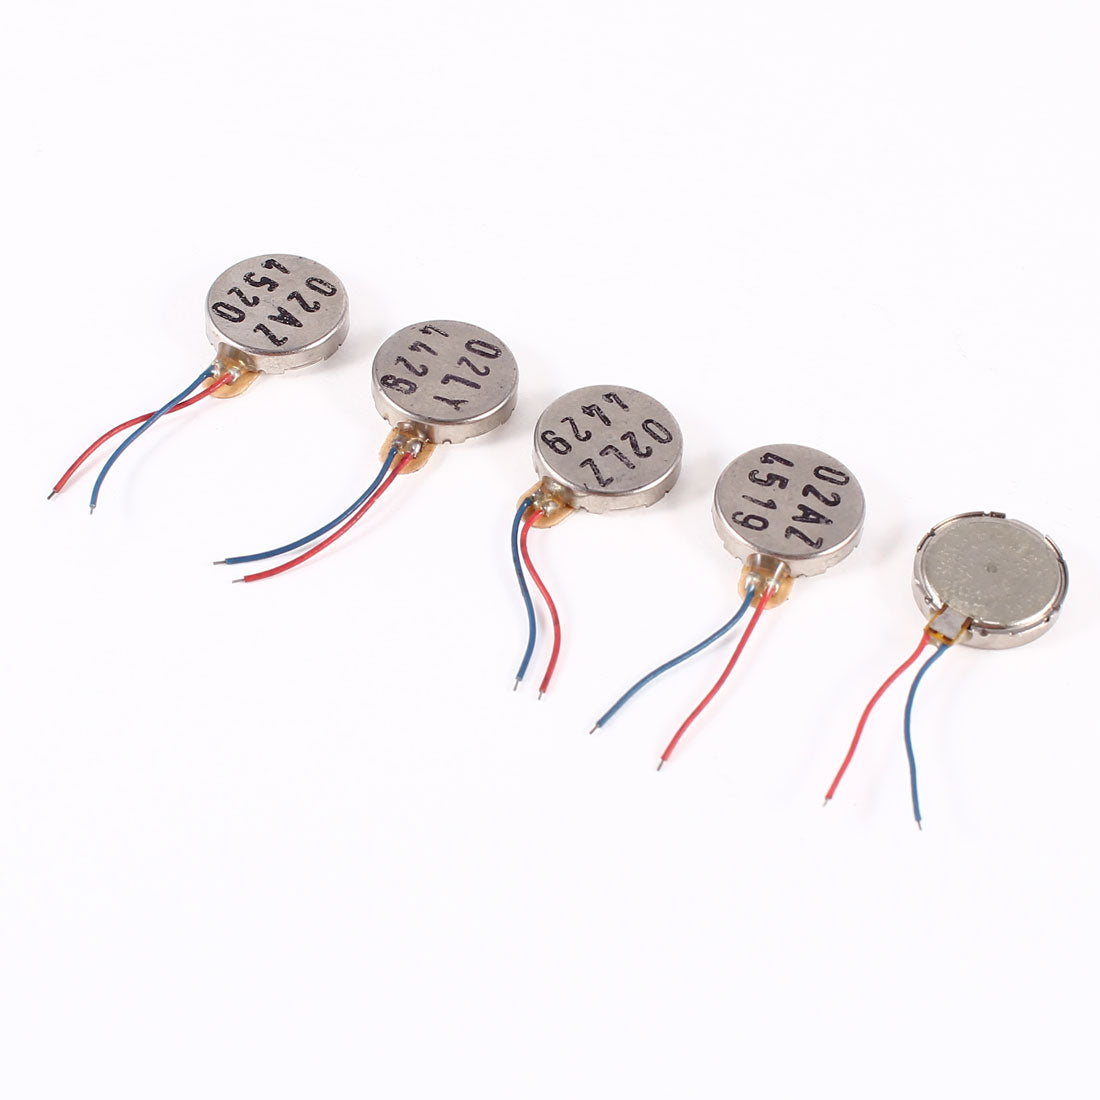 uxcell Uxcell 3V DC 2 Leads 1227 12mm x 2.9mm Coin Mobile Phone Vibration Motor 5 Pcs